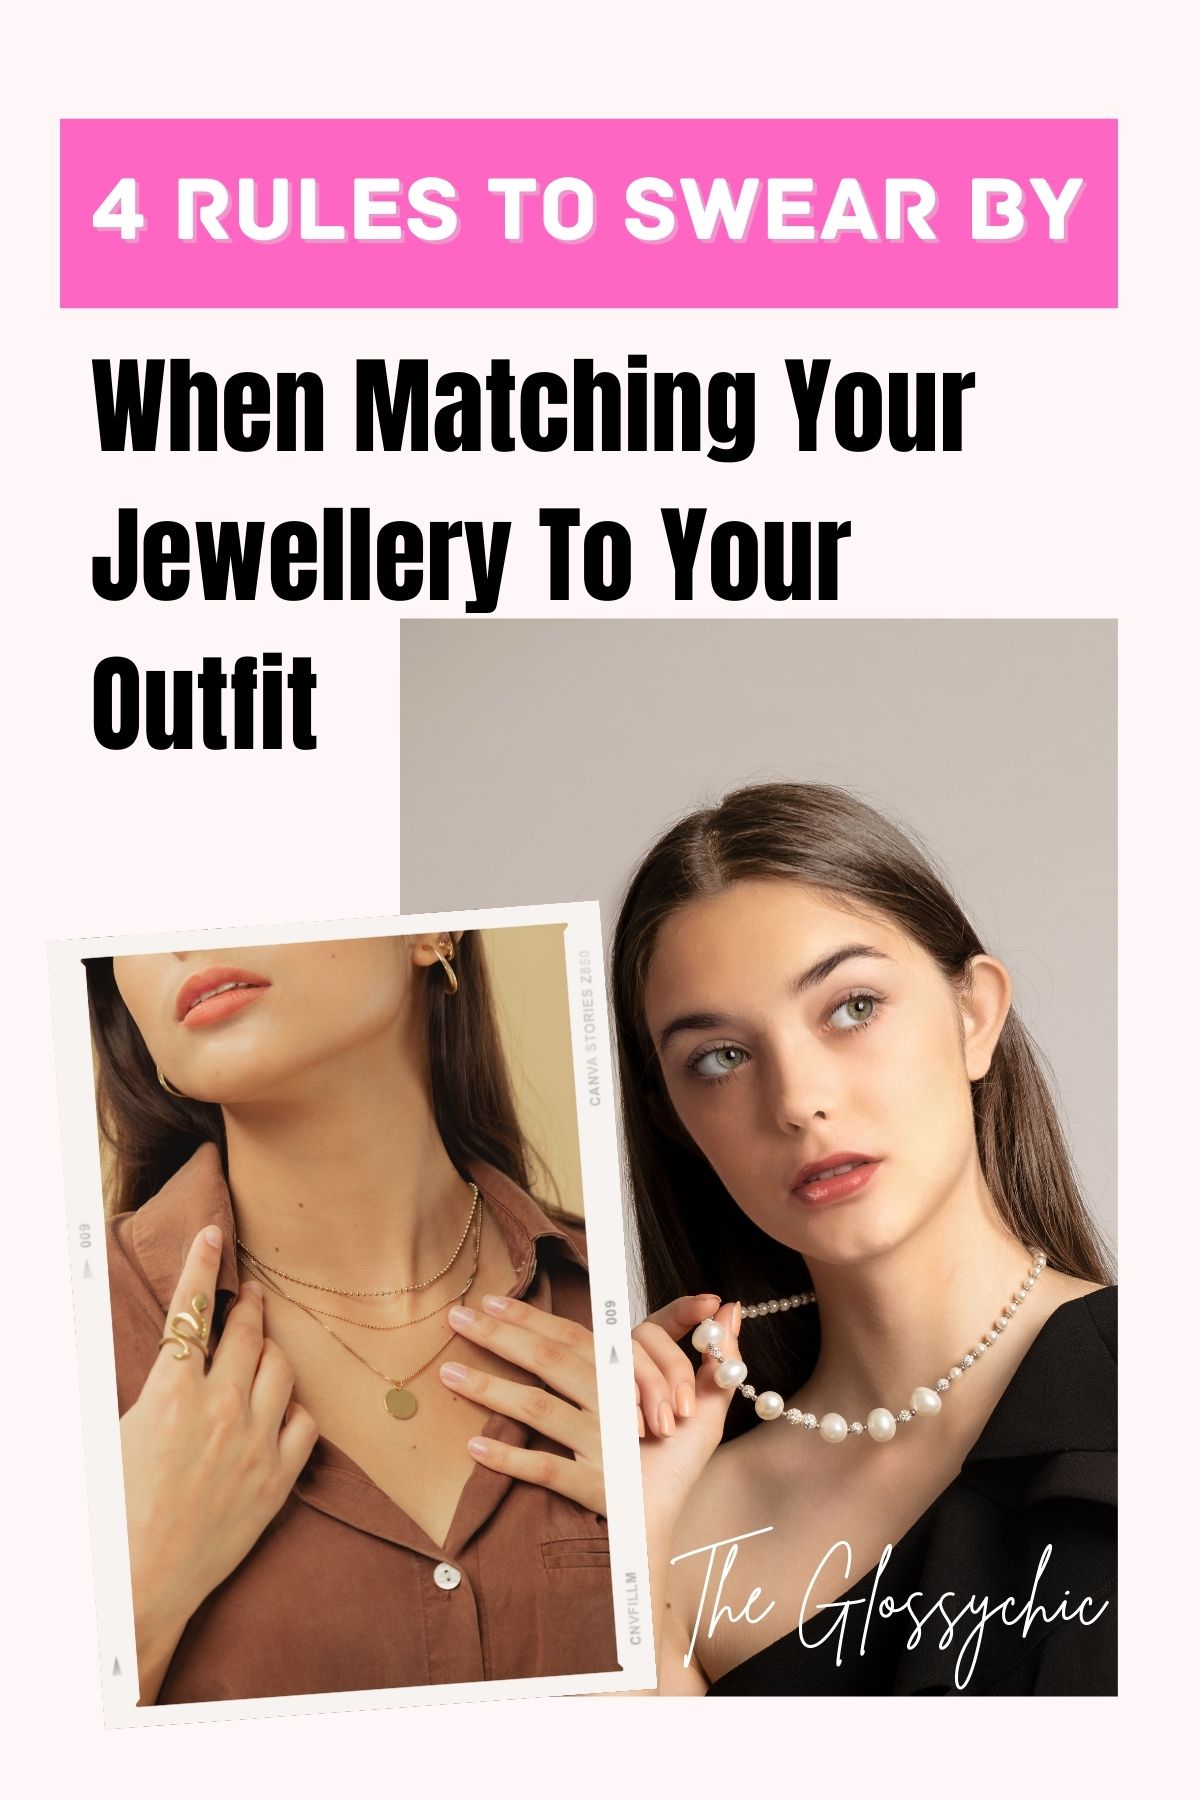 4 Rules To Swear By When Matching Your Jewellery To Your Outfit